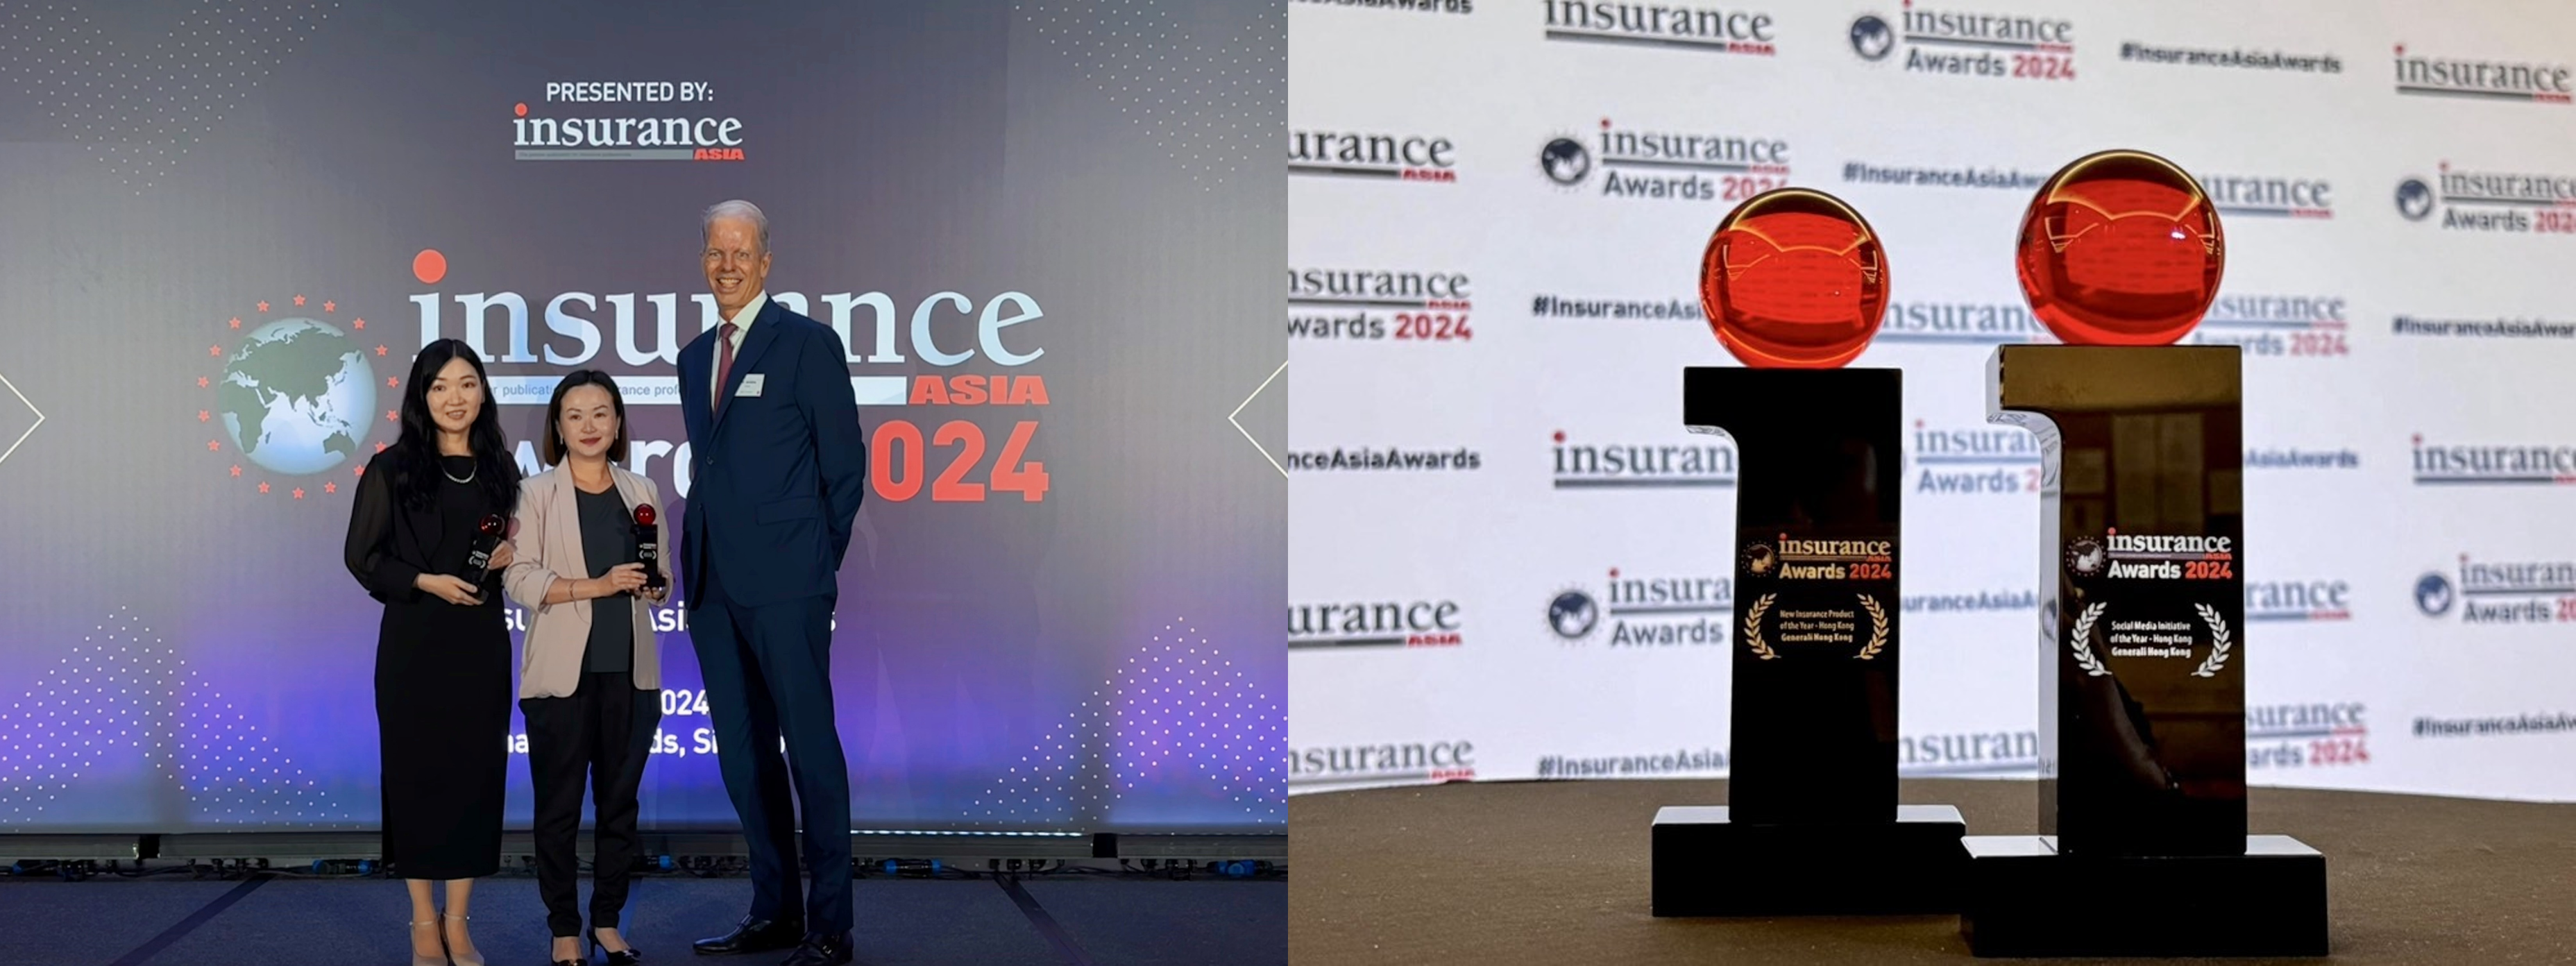 Generali Hong Kong has received “Social Media Initiative of the Year” and “New Insurance Product of the Year” awards at the Insurance Asia Awards 2024.